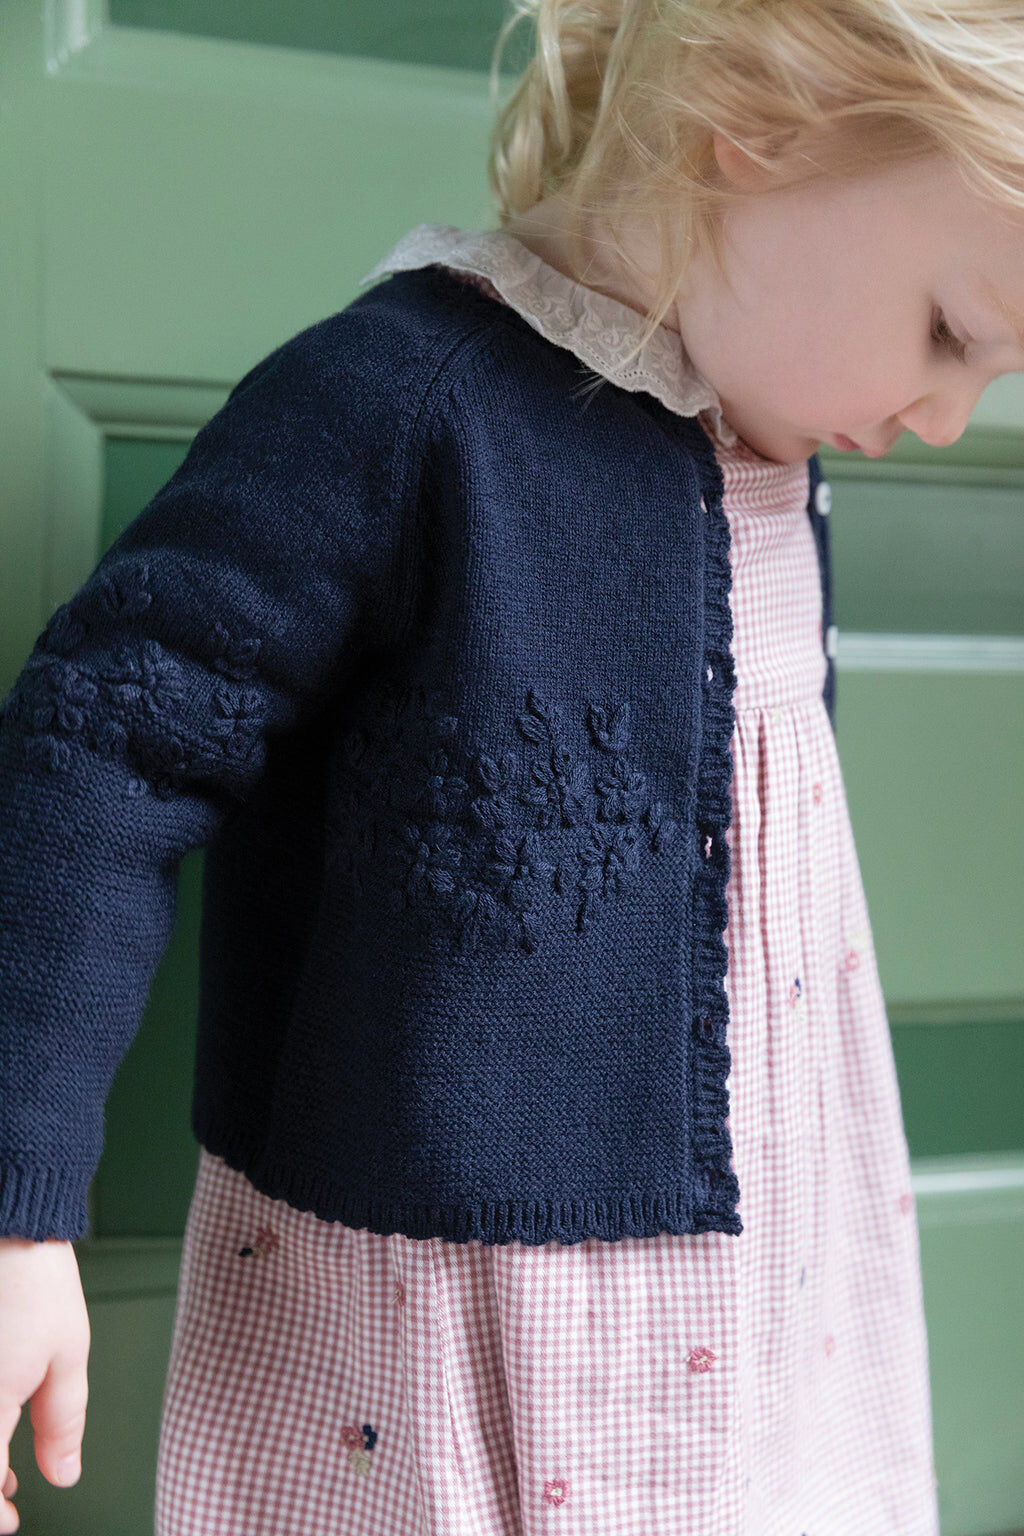 Cardigan - Navy Embrodery by hand